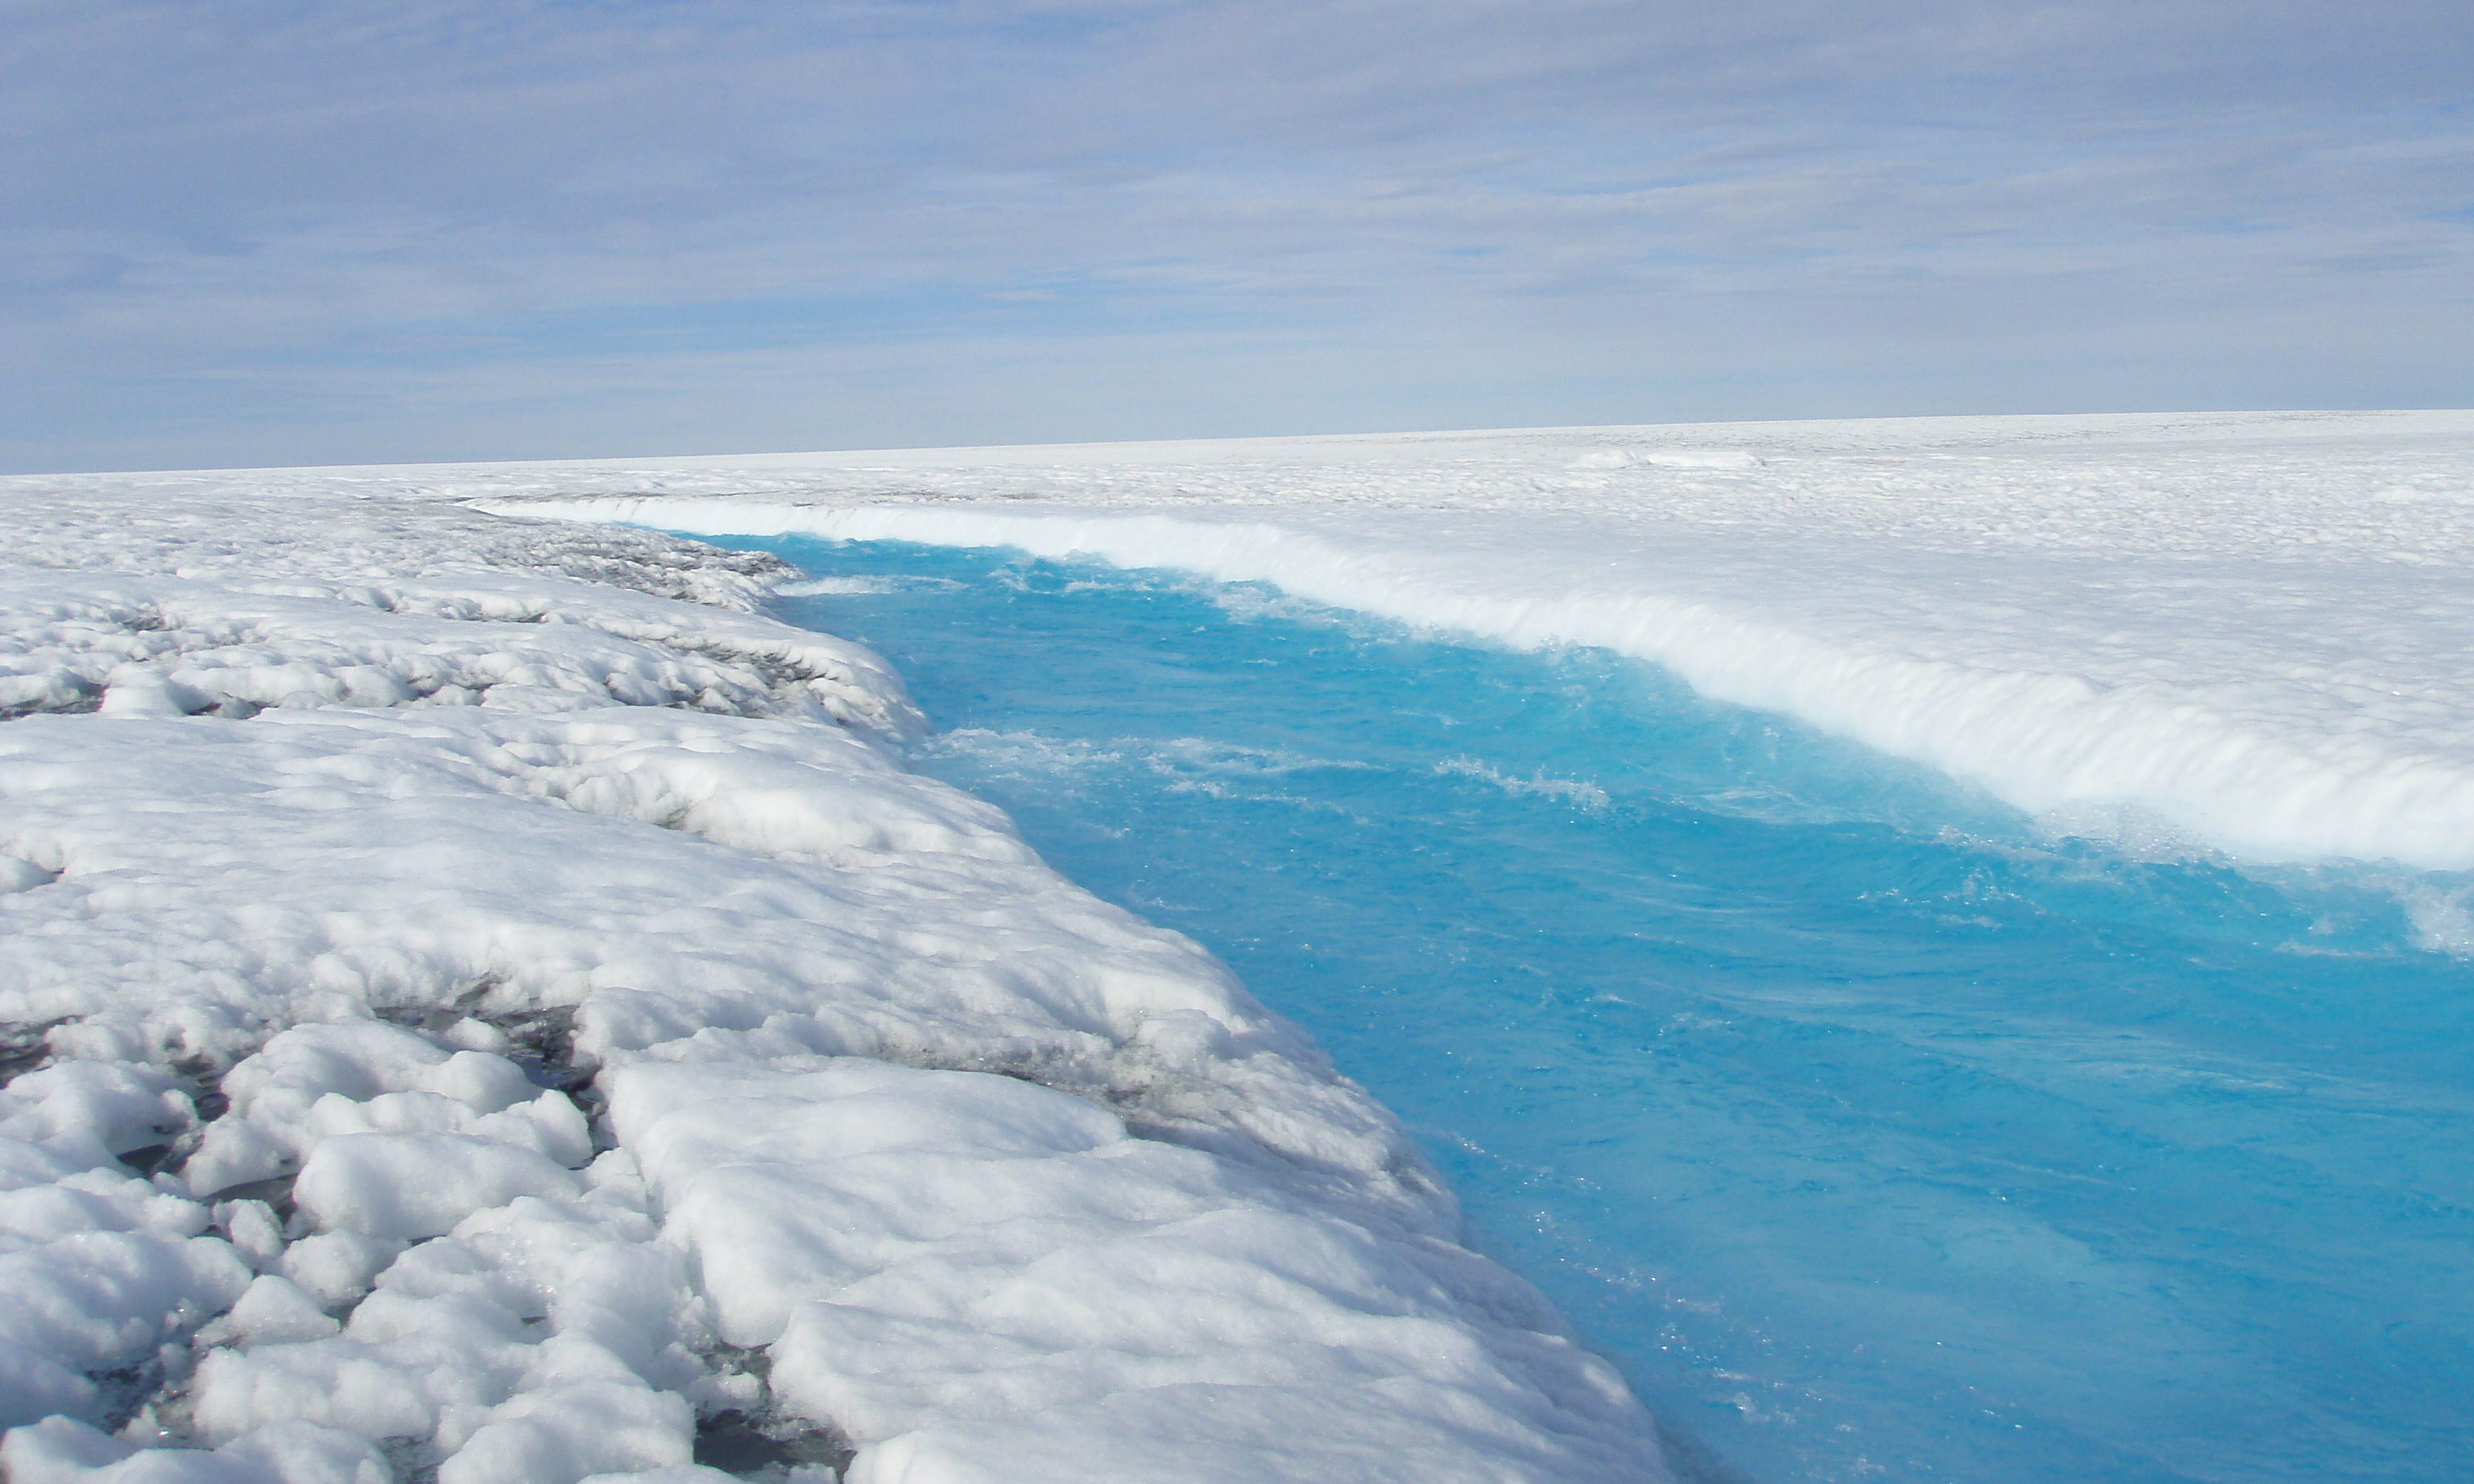 A melt stream on the Greenland ice sheet, where melting has accelerated to unprecedented rates in the face of rising temperatures, analysis of ice cores has found.